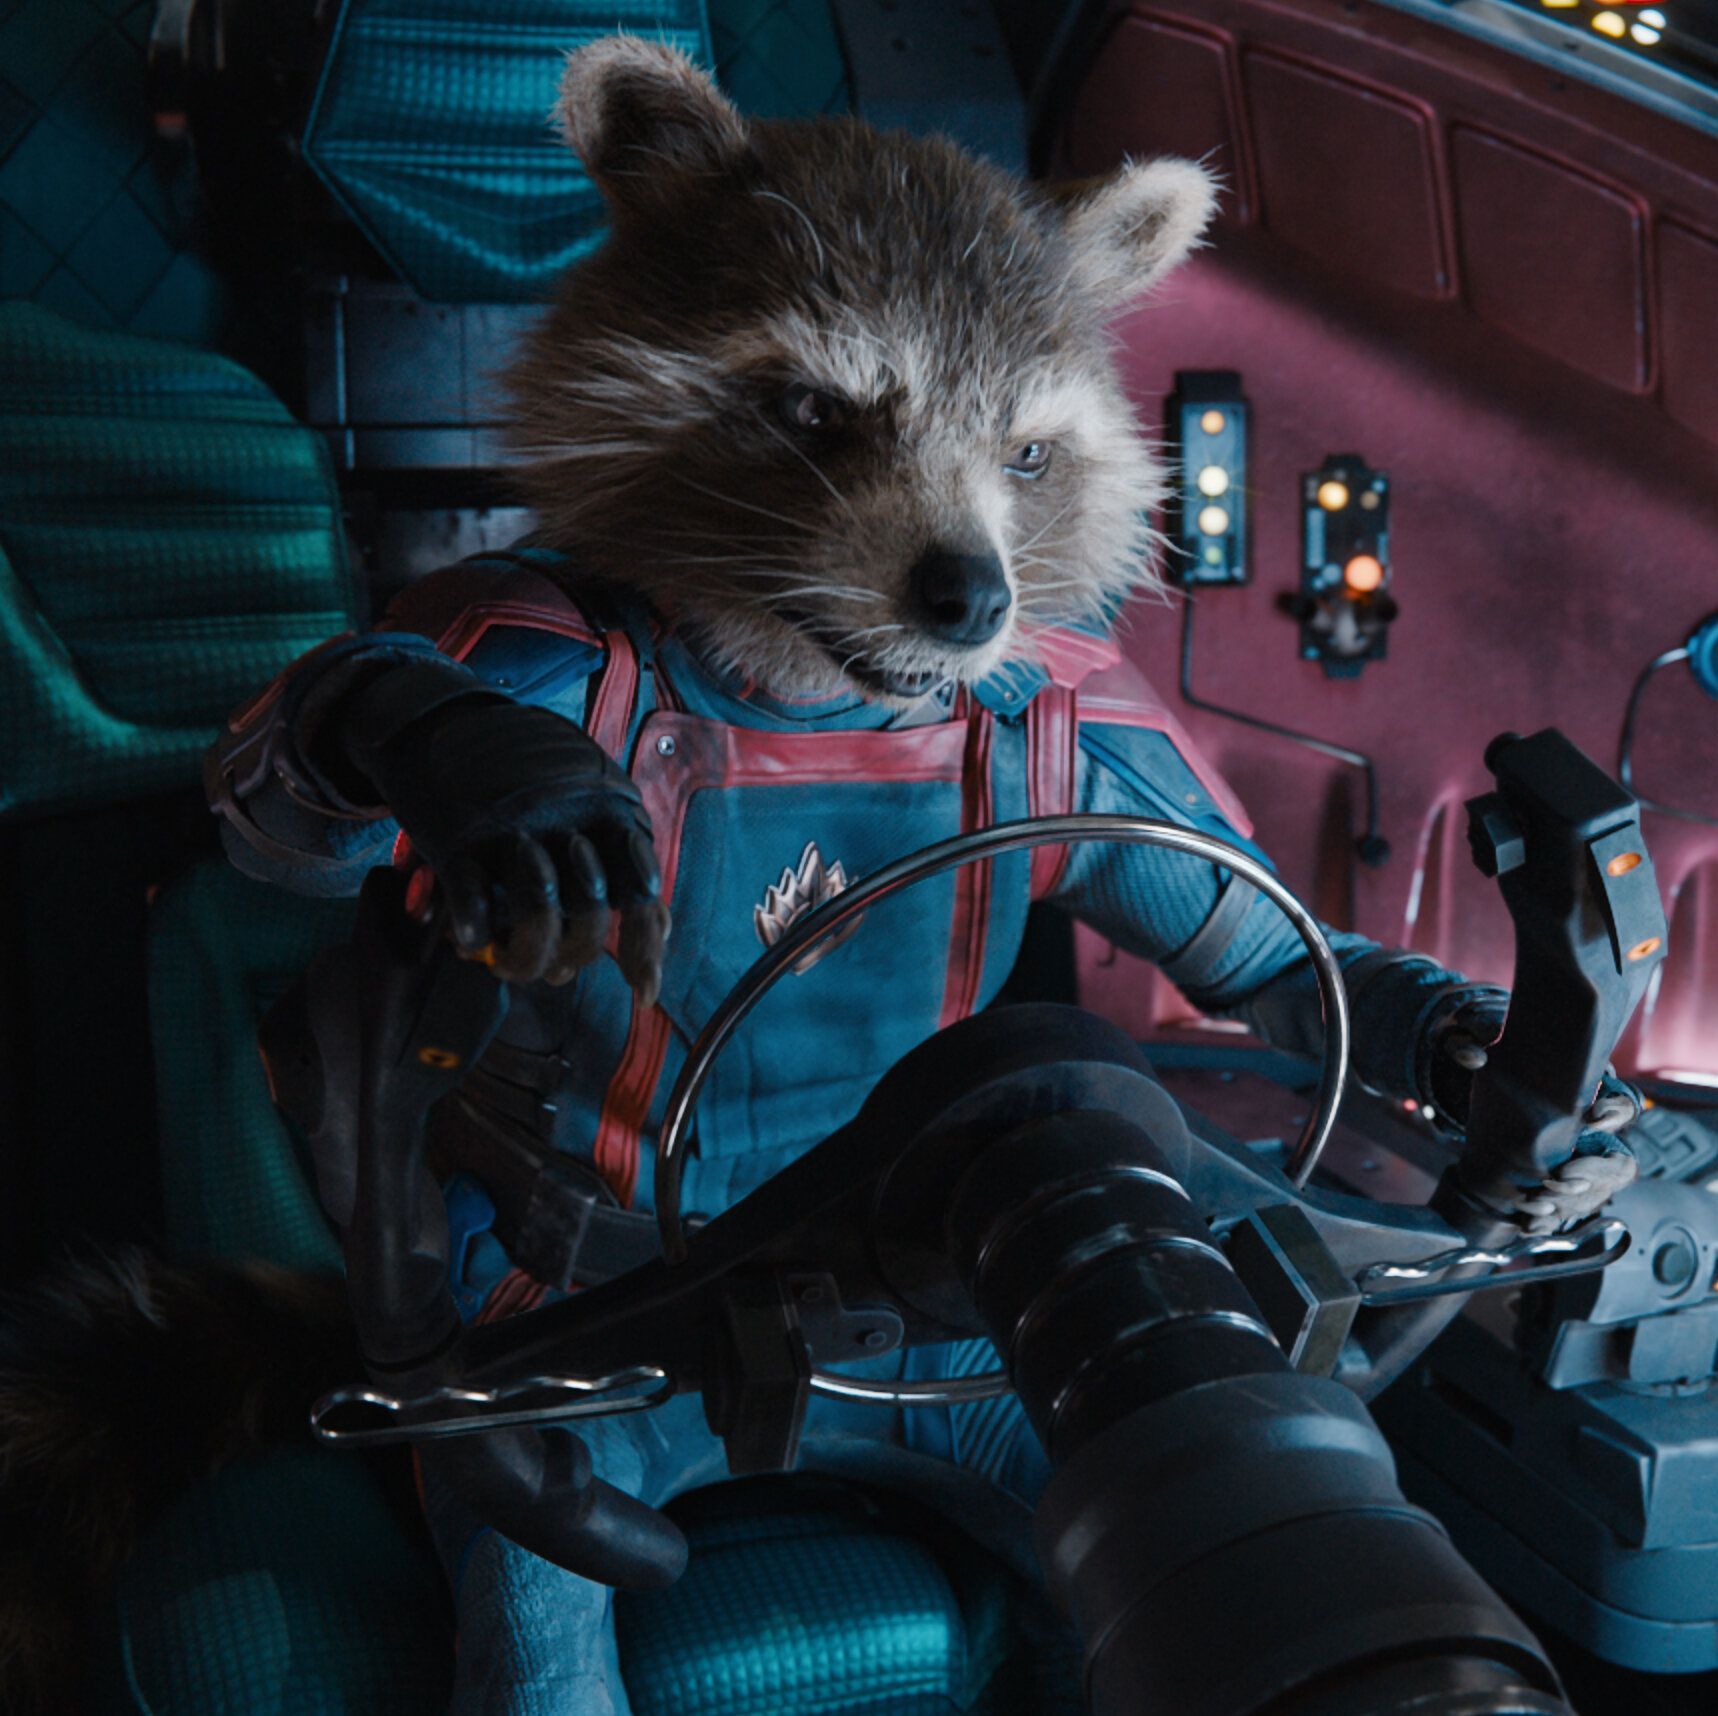 Rocket Raccoon, voiced by Bradley Cooper, sits in the cockpit of the Guardians of the Galaxy ship in Guardians of the Galaxy Vol. 2. - Guardians of the Galaxy